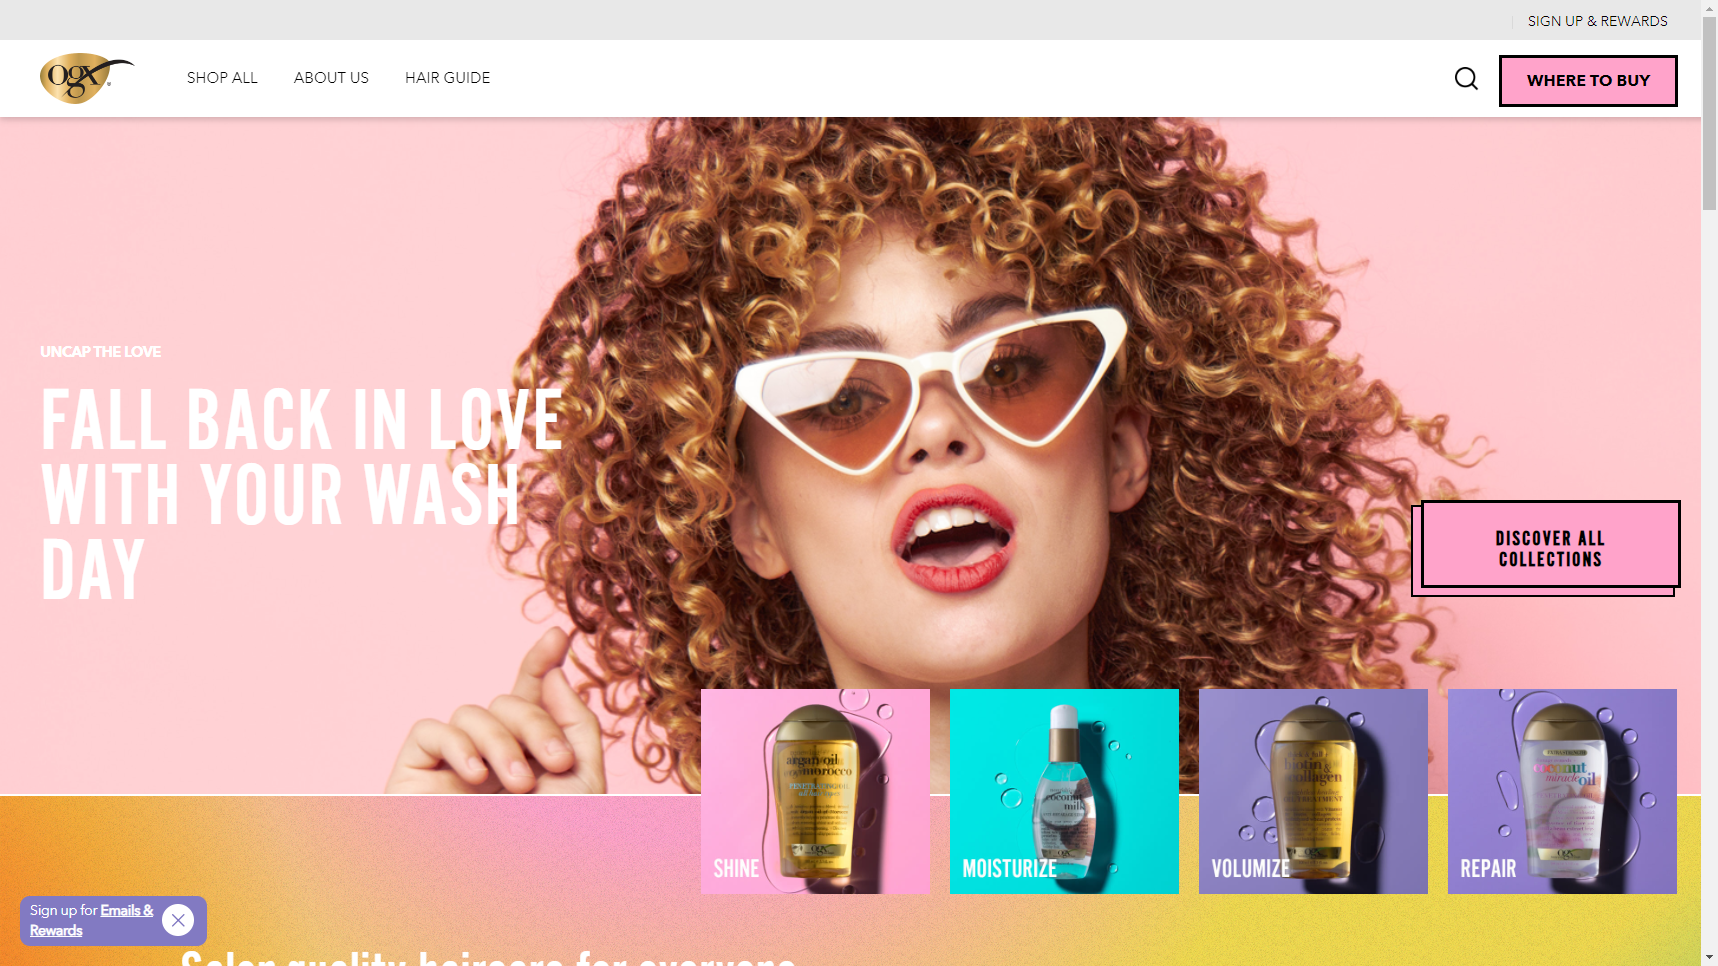 OGX - Hair Product Manufacturer